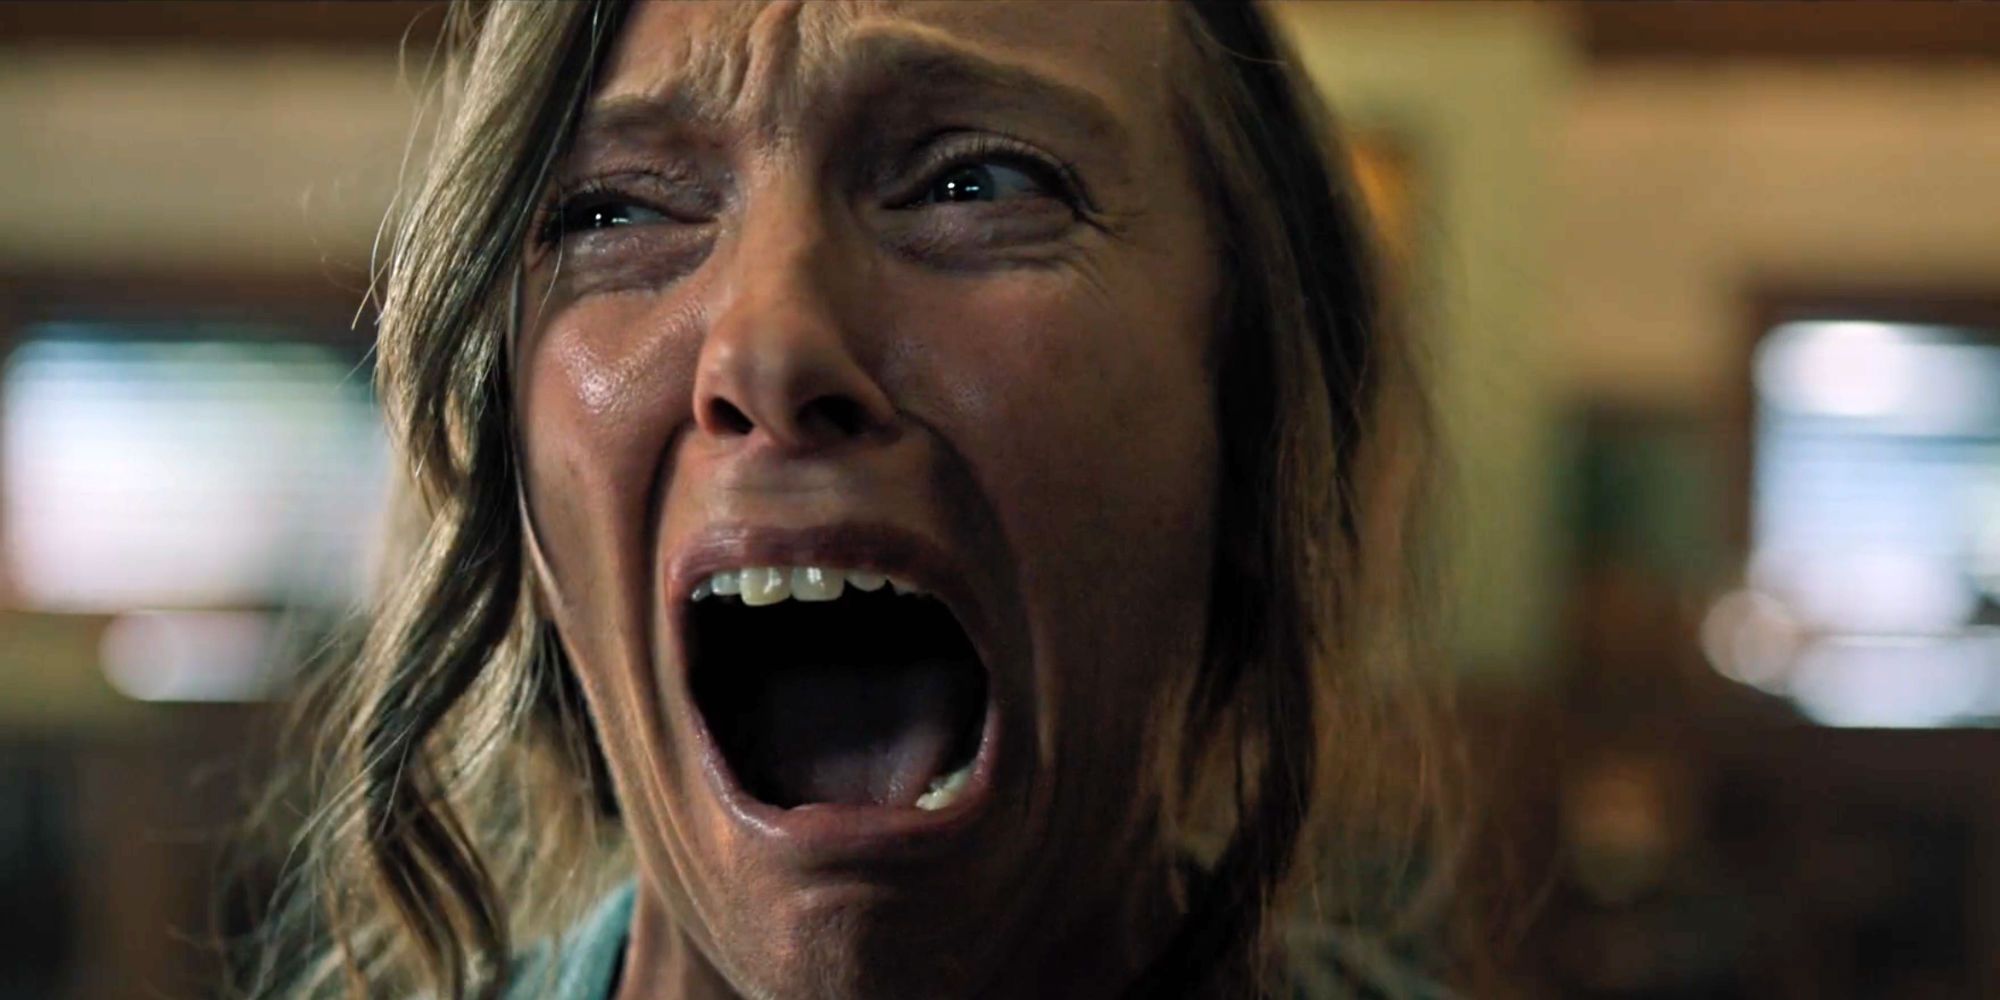 Toni Collette screams in terror from Hereditary 